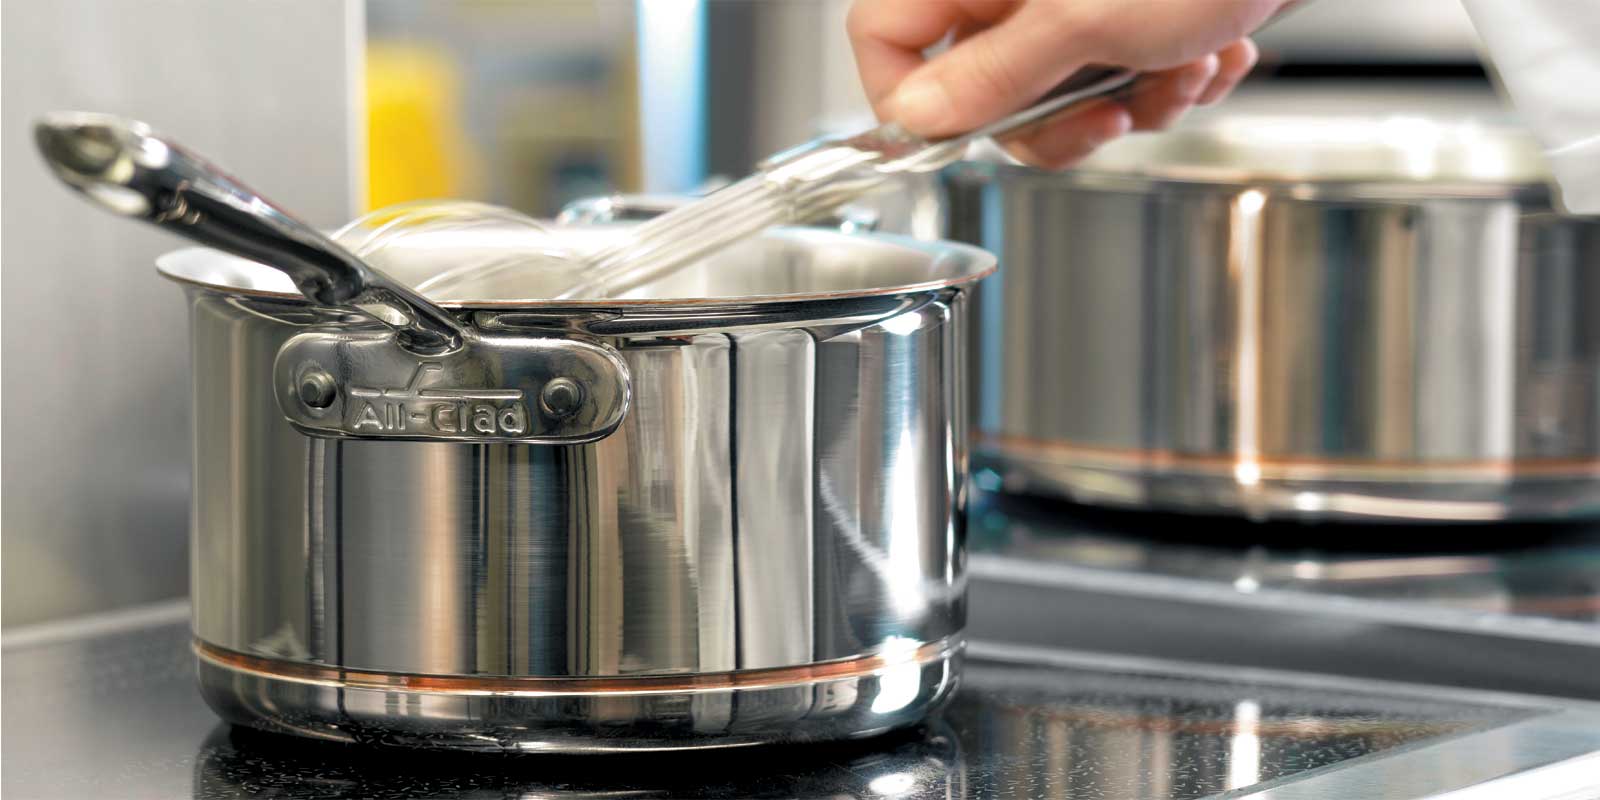 All-Clad Pots and Pans - Copper-Core® This Copper-Core® series has a five-layer metal connection with a copper core that maximizes thermal conductivity and heat distribution. The outer layer is made of stainless steel for cleaning and durability.

- suitable for all types of stoves, ideal for professional induction and gas (gastro stoves)
- maximum torsional rigidity
- very good heat distribution
- comfortable thanks to the pouring rim
- ergonomic handles with anti-slip brakes